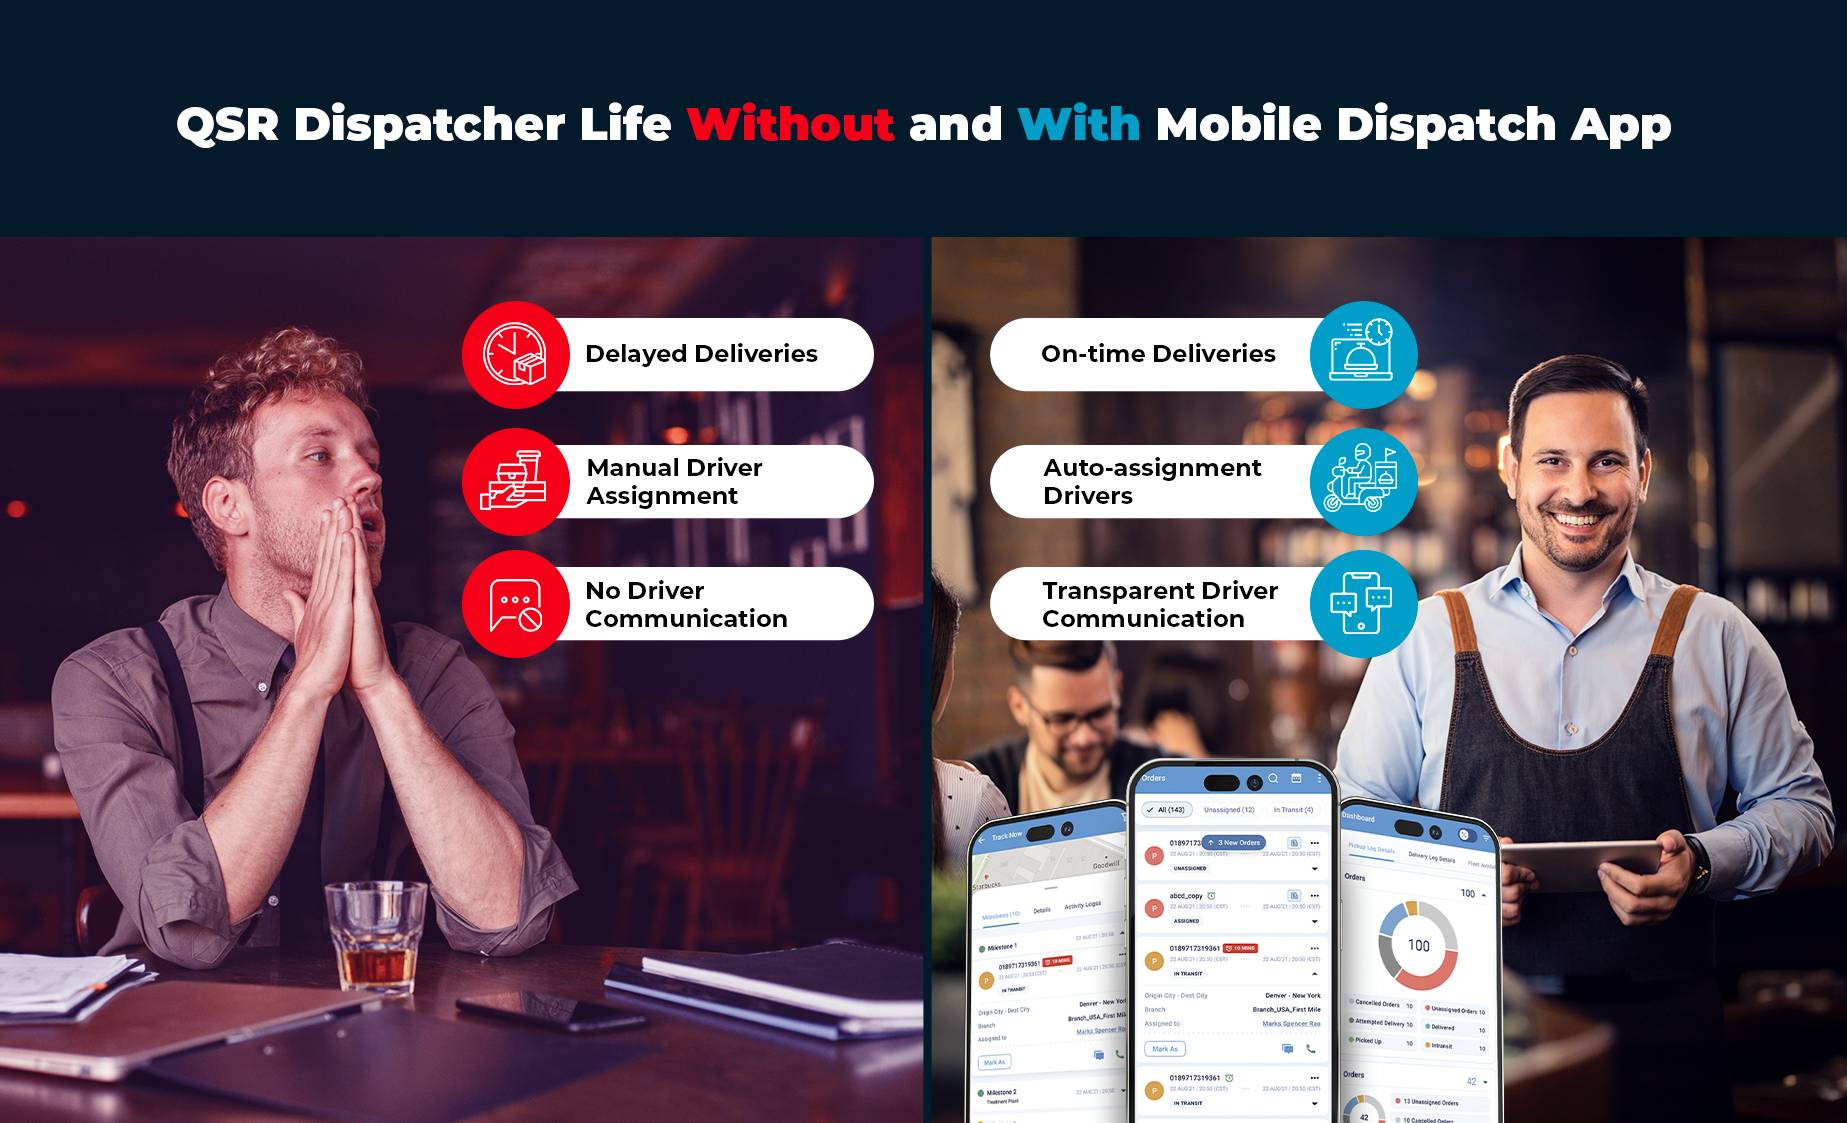 Dispatcher Life With and Without Mobile App